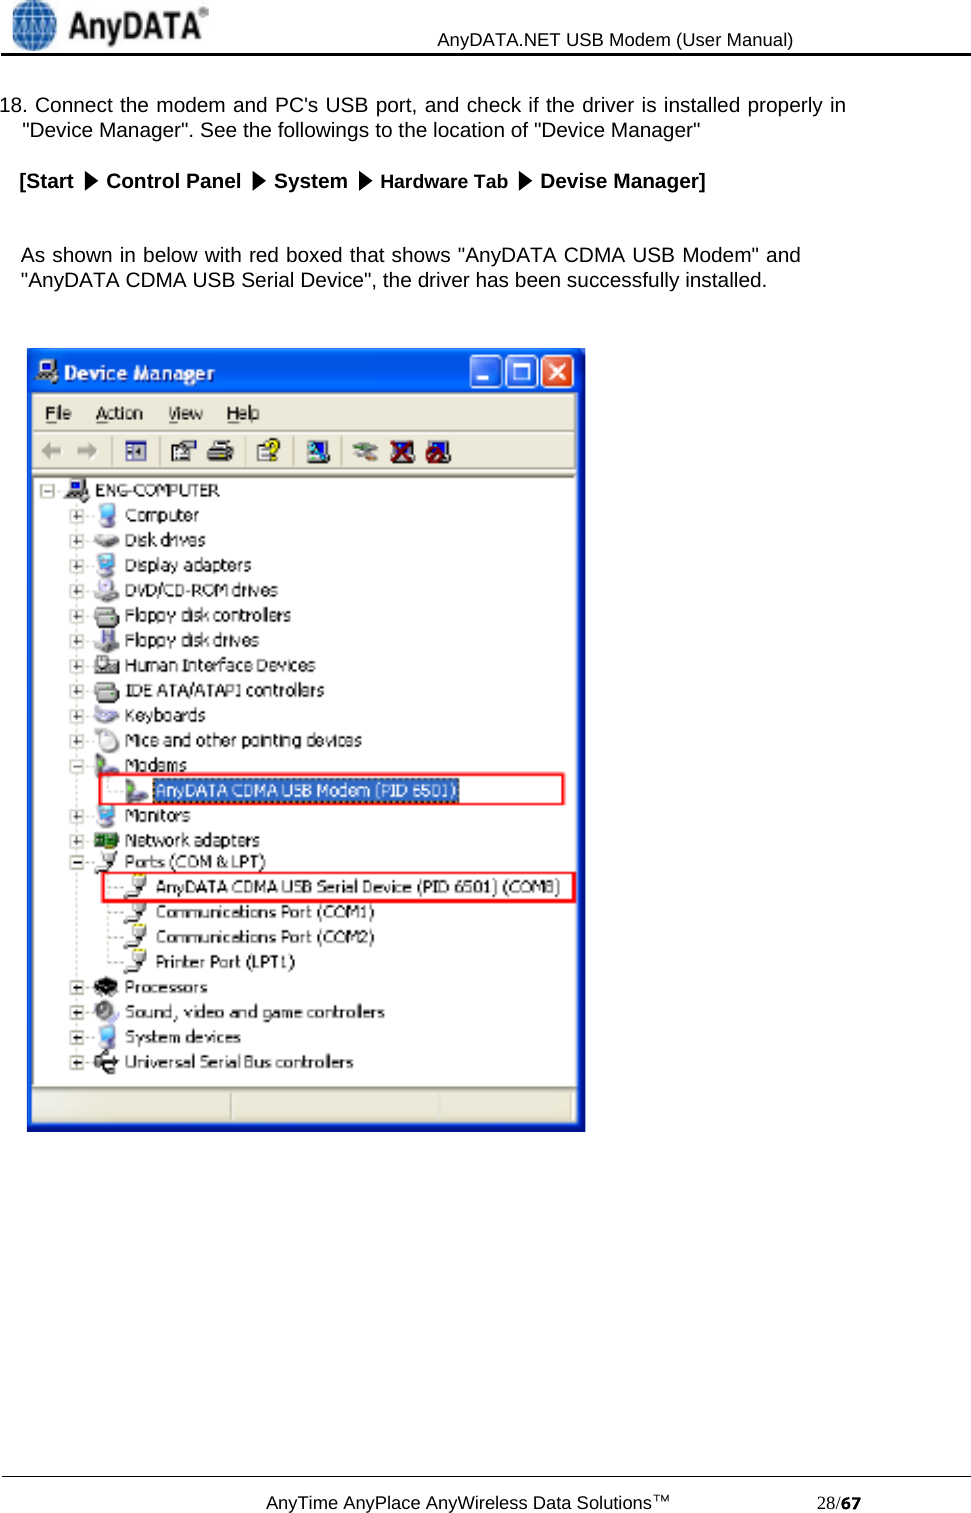                                             AnyDATA.NET USB Modem (User Manual)AnyTime AnyPlace AnyWireless Data Solutions™                            28/18. Connect the modem and PC&apos;s USB port, and check if the driver is installed properly in    &quot;Device Manager&quot;. See the followings to the location of &quot;Device Manager&quot;[Start   Control Panel   System   Hardware Tab   Devise Manager]As shown in below with red boxed that shows &quot;AnyDATA CDMA USB Modem&quot; and&quot;AnyDATA CDMA USB Serial Device&quot;, the driver has been successfully installed.